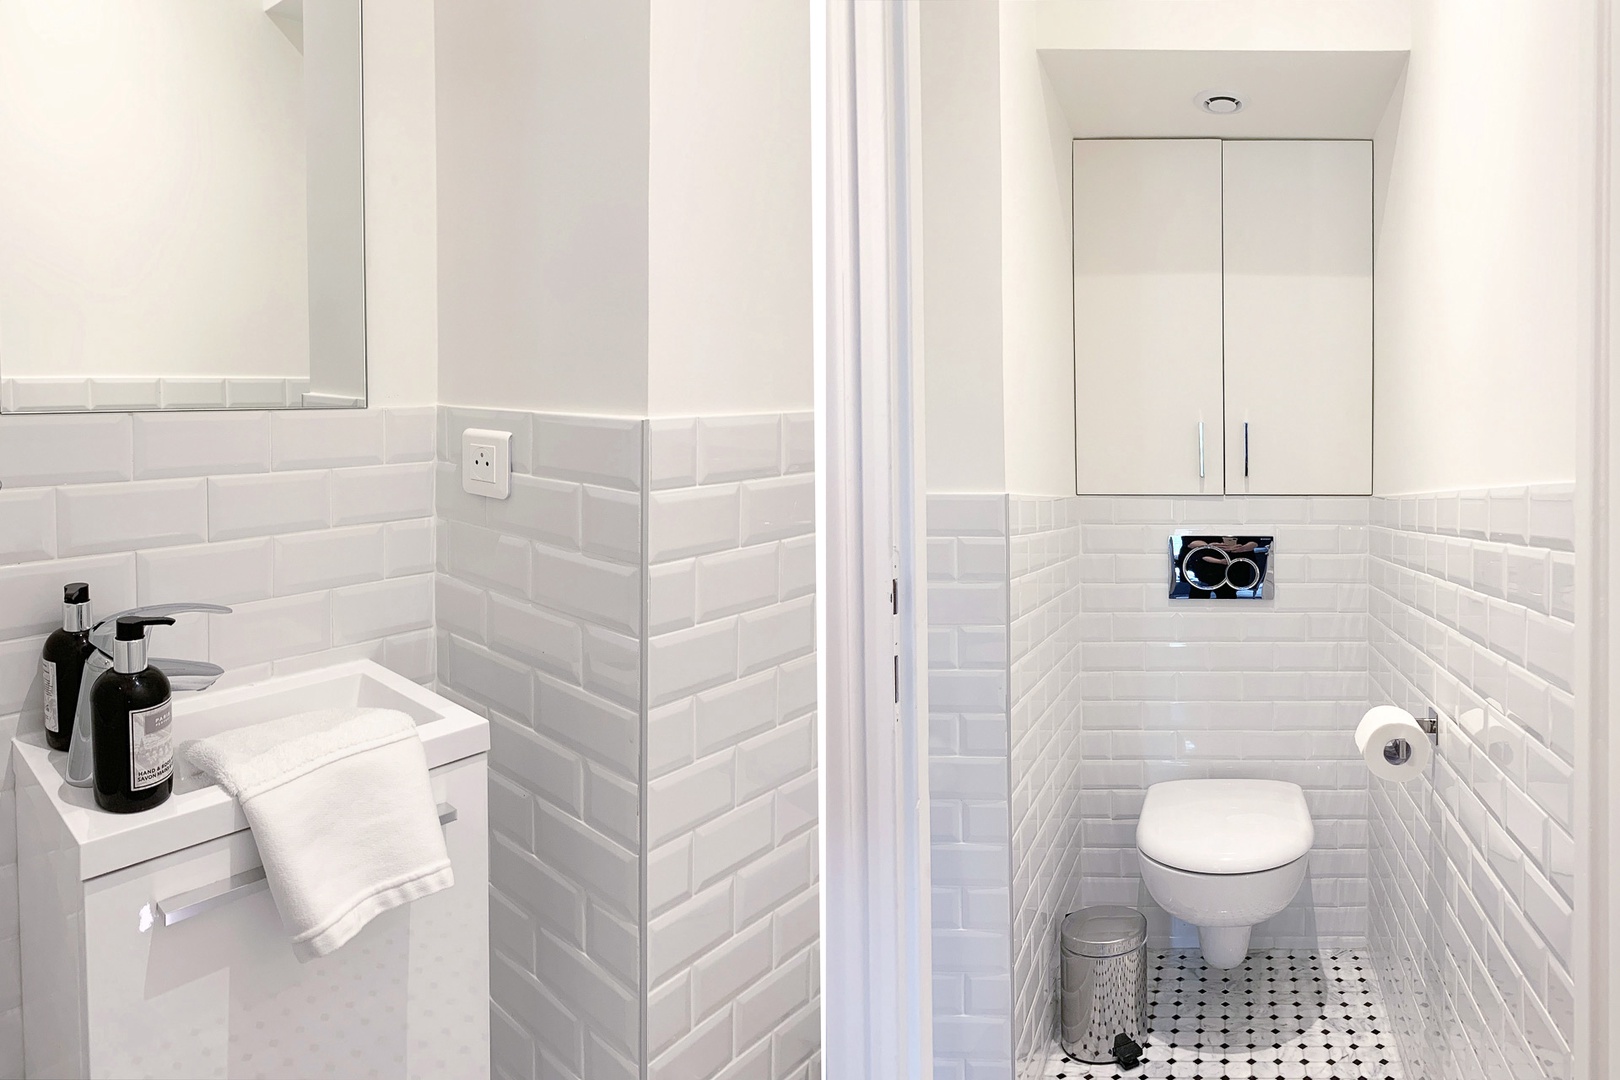 The half bath provides an extra space for getting ready.